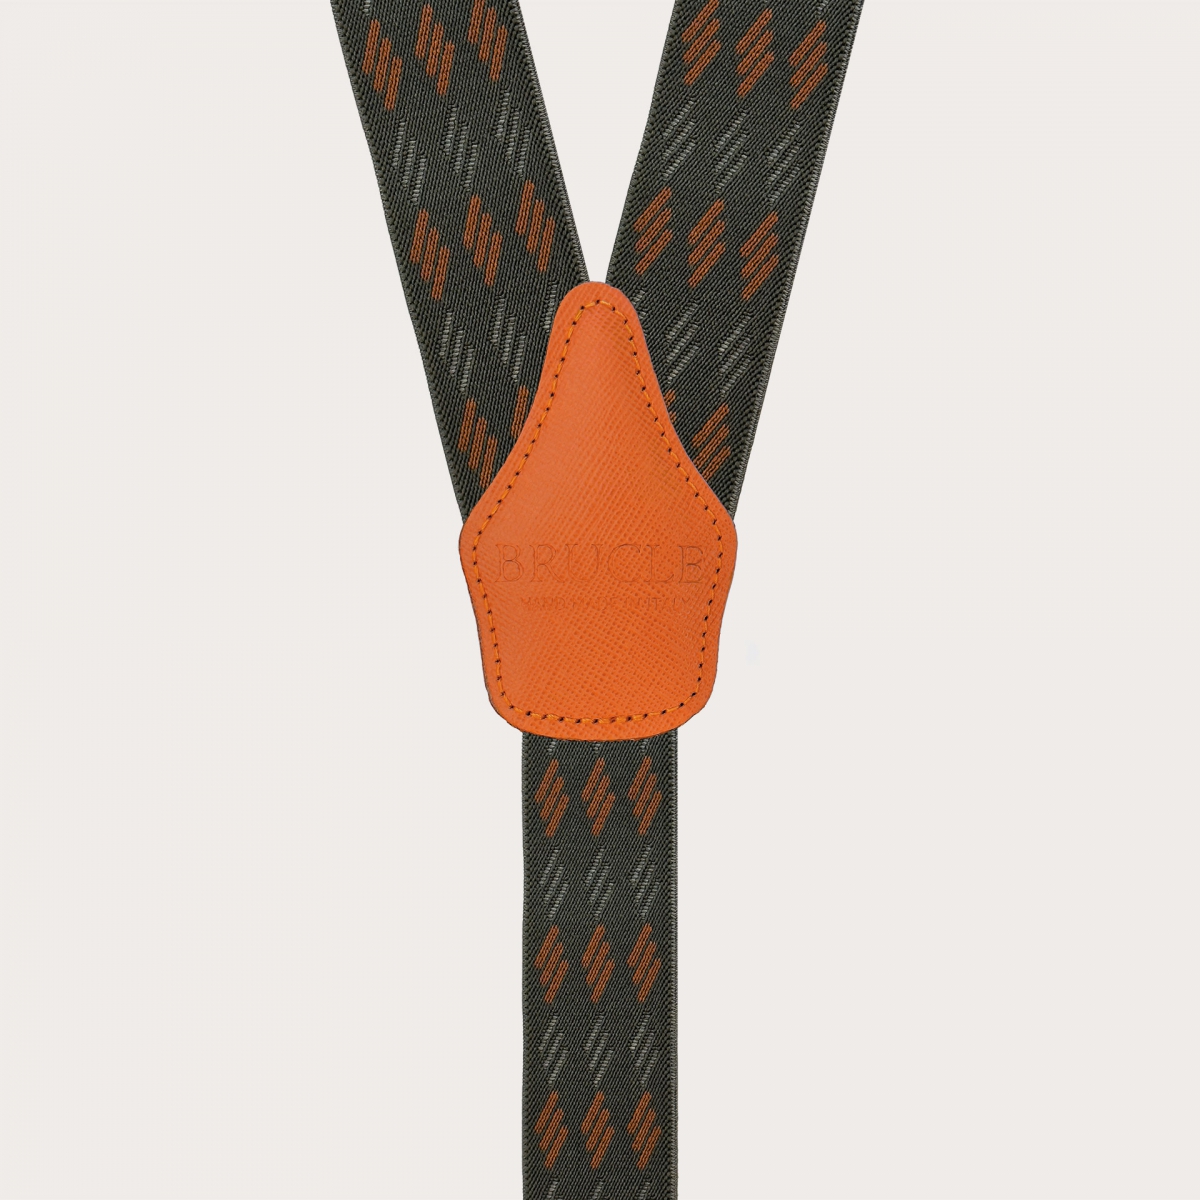 Green and orange striped elastic suspenders for buttons or clips